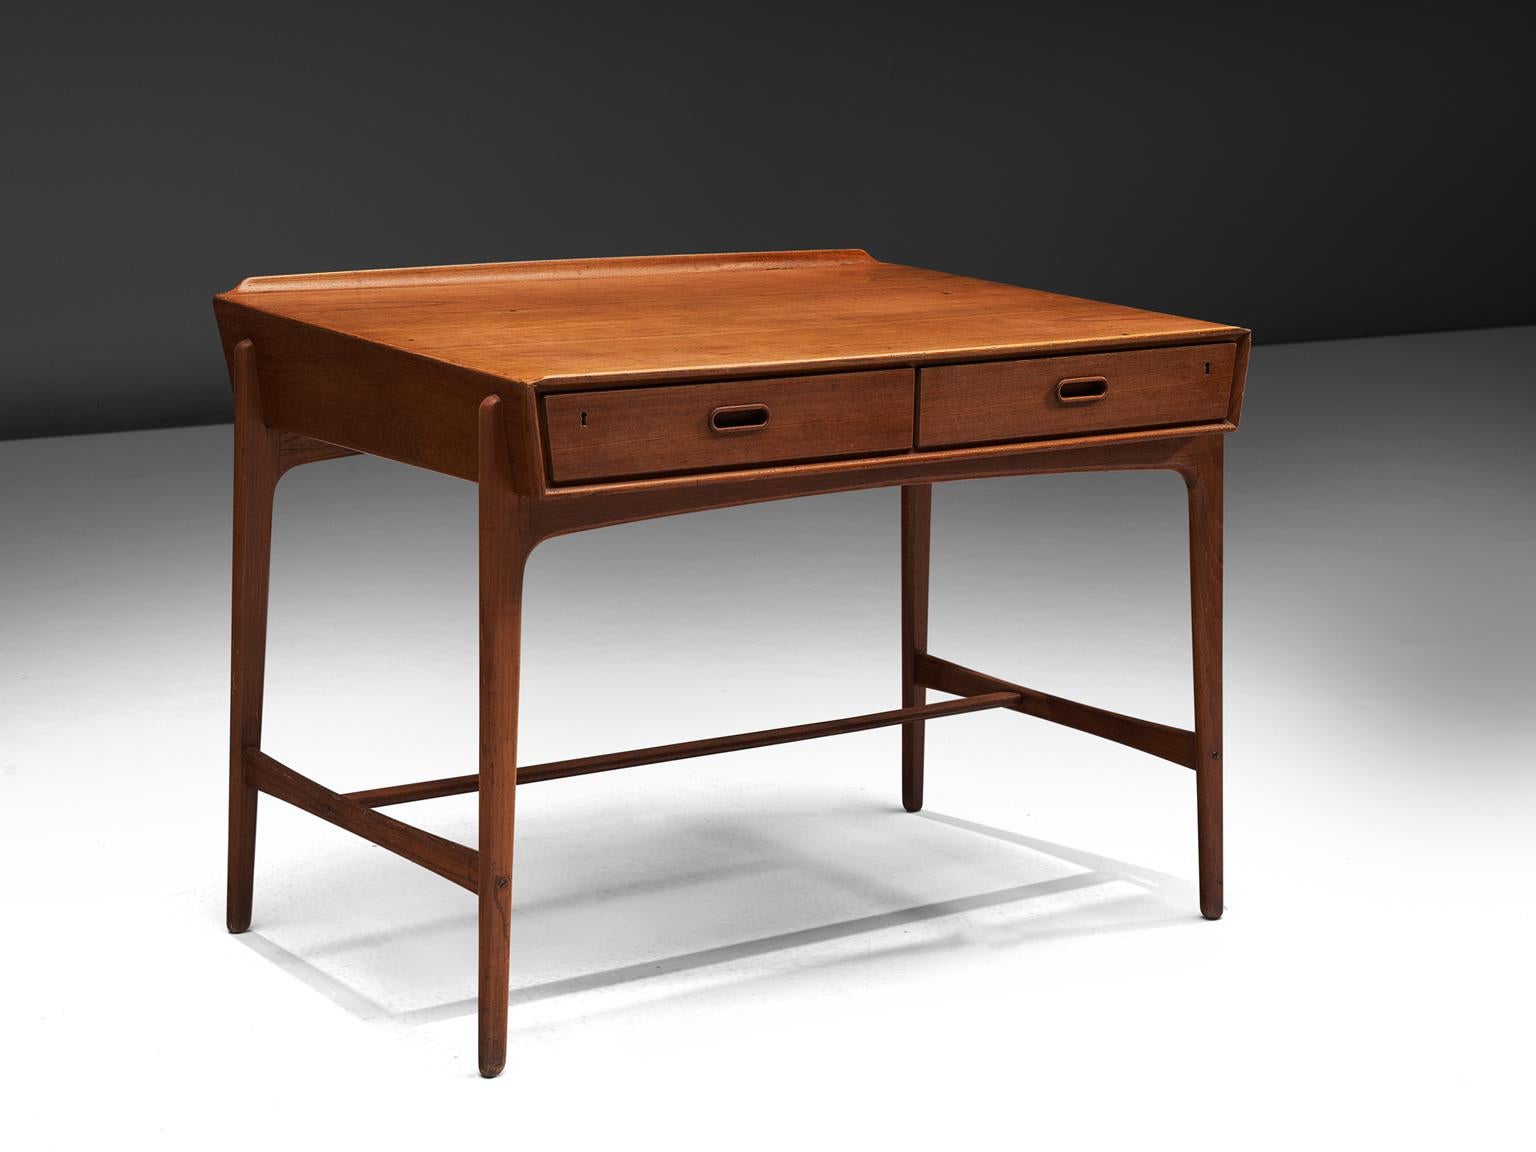 Svend Aage Madsen for Sigurd Hansens Møbelfabrik, writing desk in teak wood, Denmark, 1950s.

This writing desk is designed by Svend Aage Madsen in the 1950s. The top seems to lay into the frame. Please note the slightly angled legs, with lovely